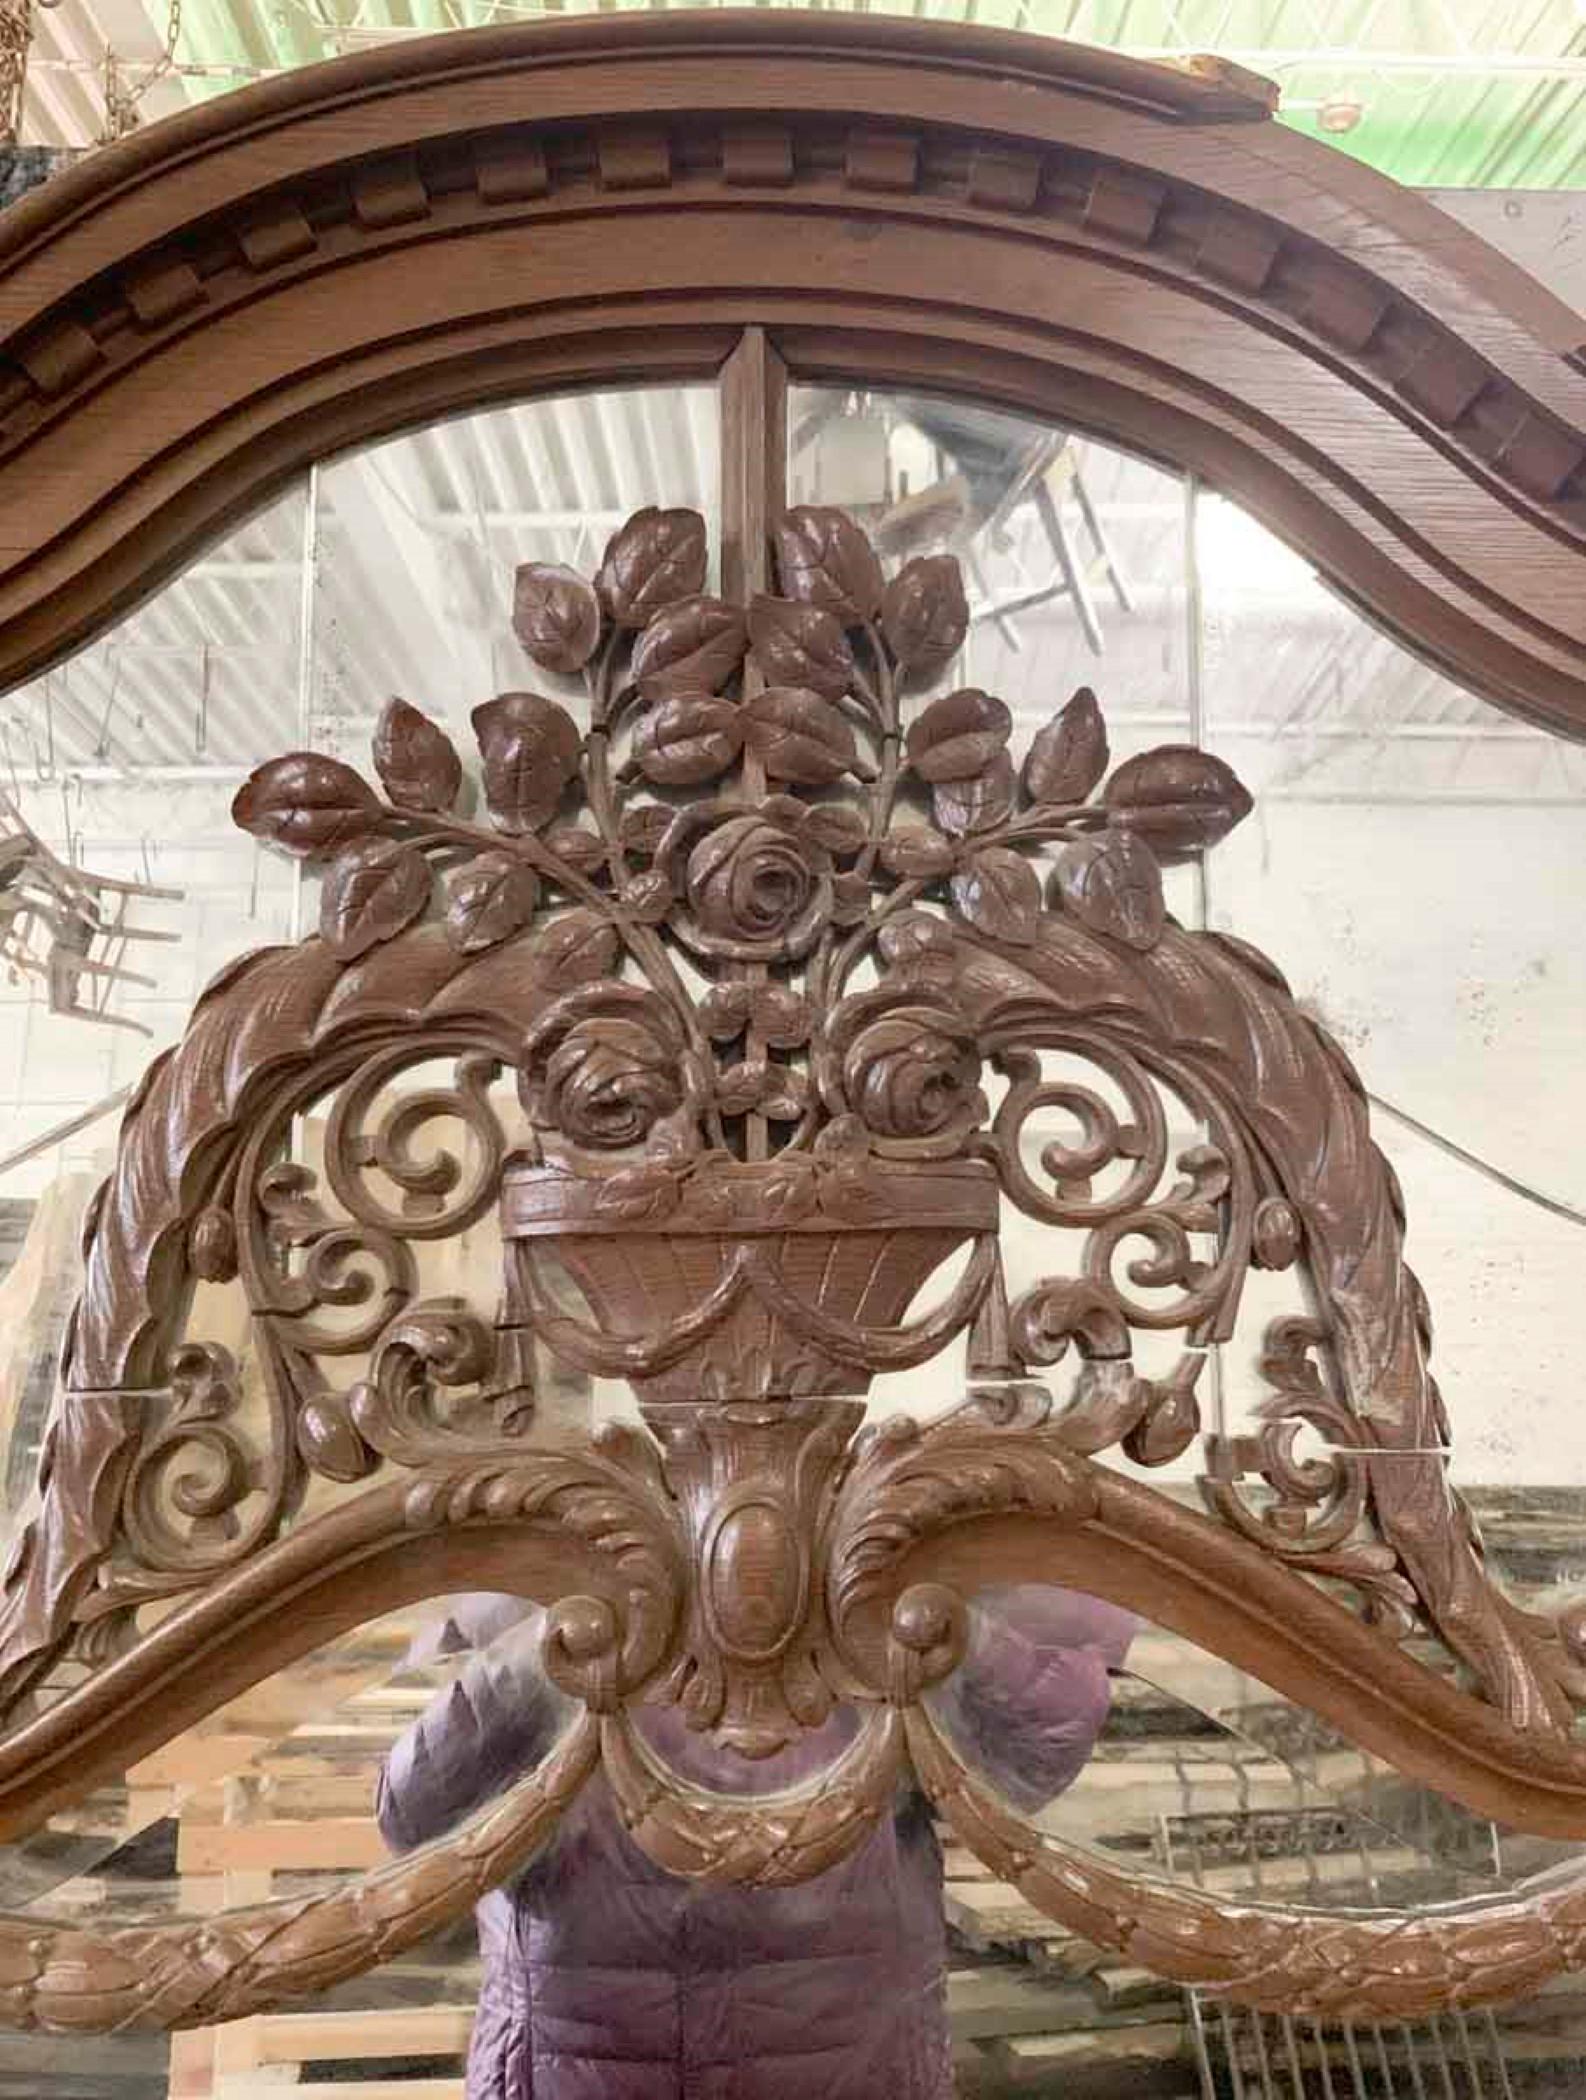 1880s large oak over mantel mirror that also can be used as a floor or wall mirror. Hand carved frame with floral details. Original beveled mirror with light distressing. Some minor cracks in the decorative glass pieces and general wear in the wood